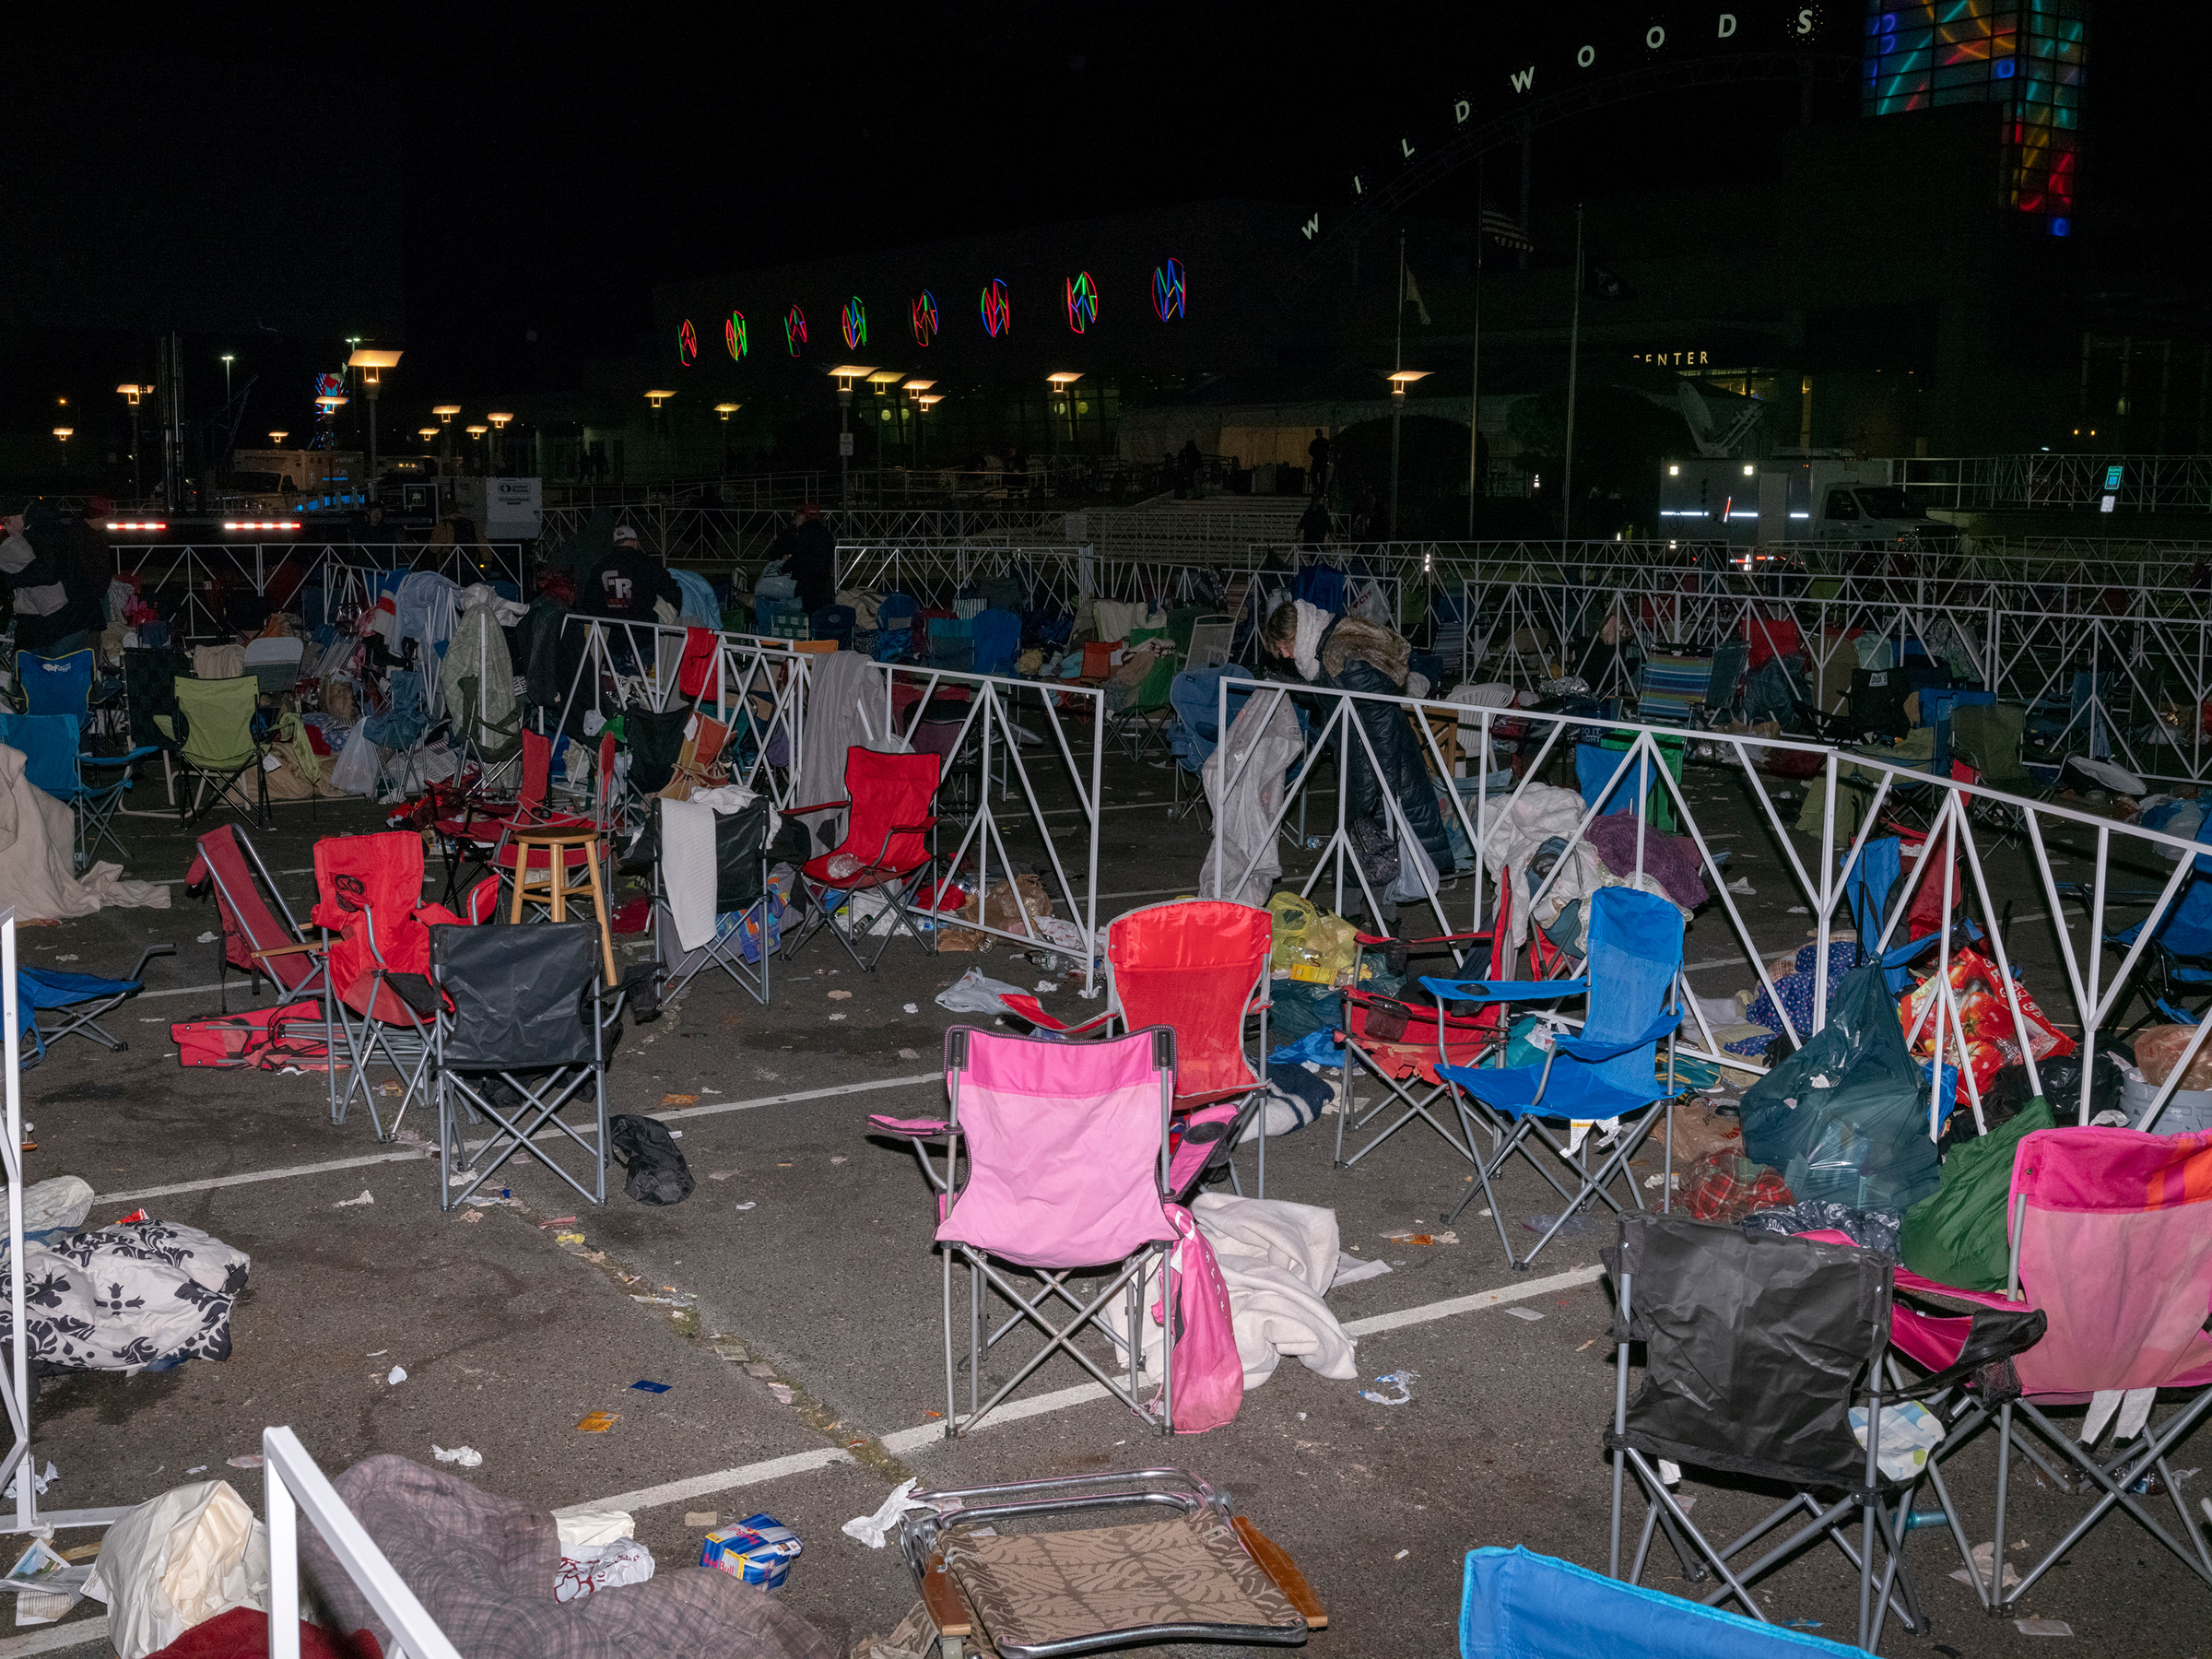 <strong>Wildwood, N.J., Jan. 28, 2020.</strong> After Trump's campaign events, "there is always a mountain of discarded chairs and coolers that aren't allowed into the rally. People wait in line for hours, even days, in order to get a prime place to watch the President speak." (Peter van Agtmael—Magnum Photos for TIME)